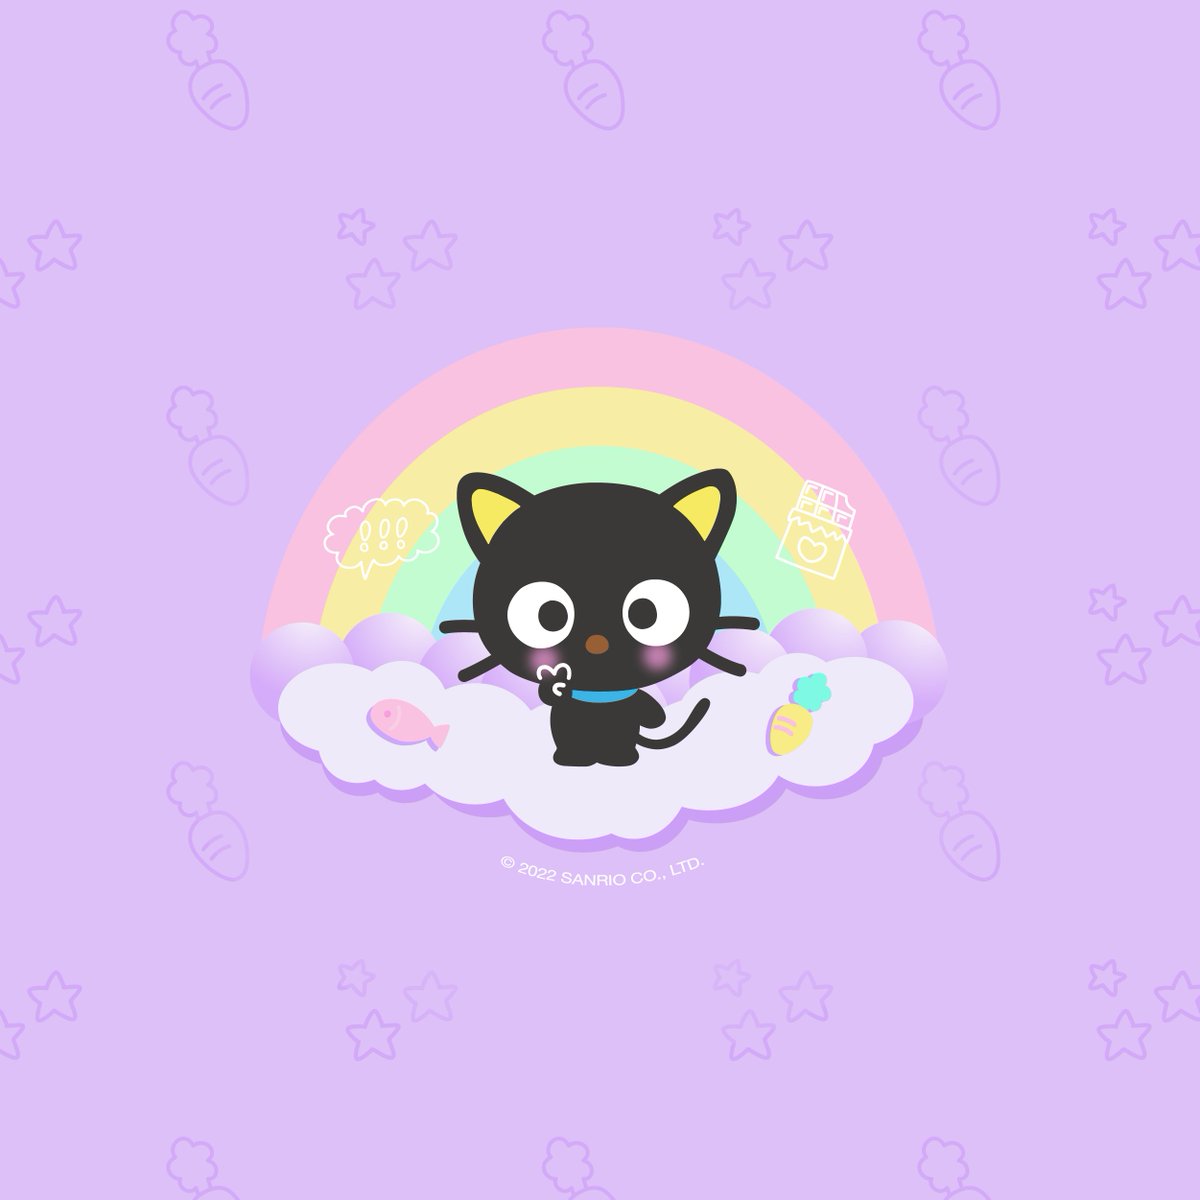  Be Positive   CHOCOCAT WALLPAPERS I will make another Chococat